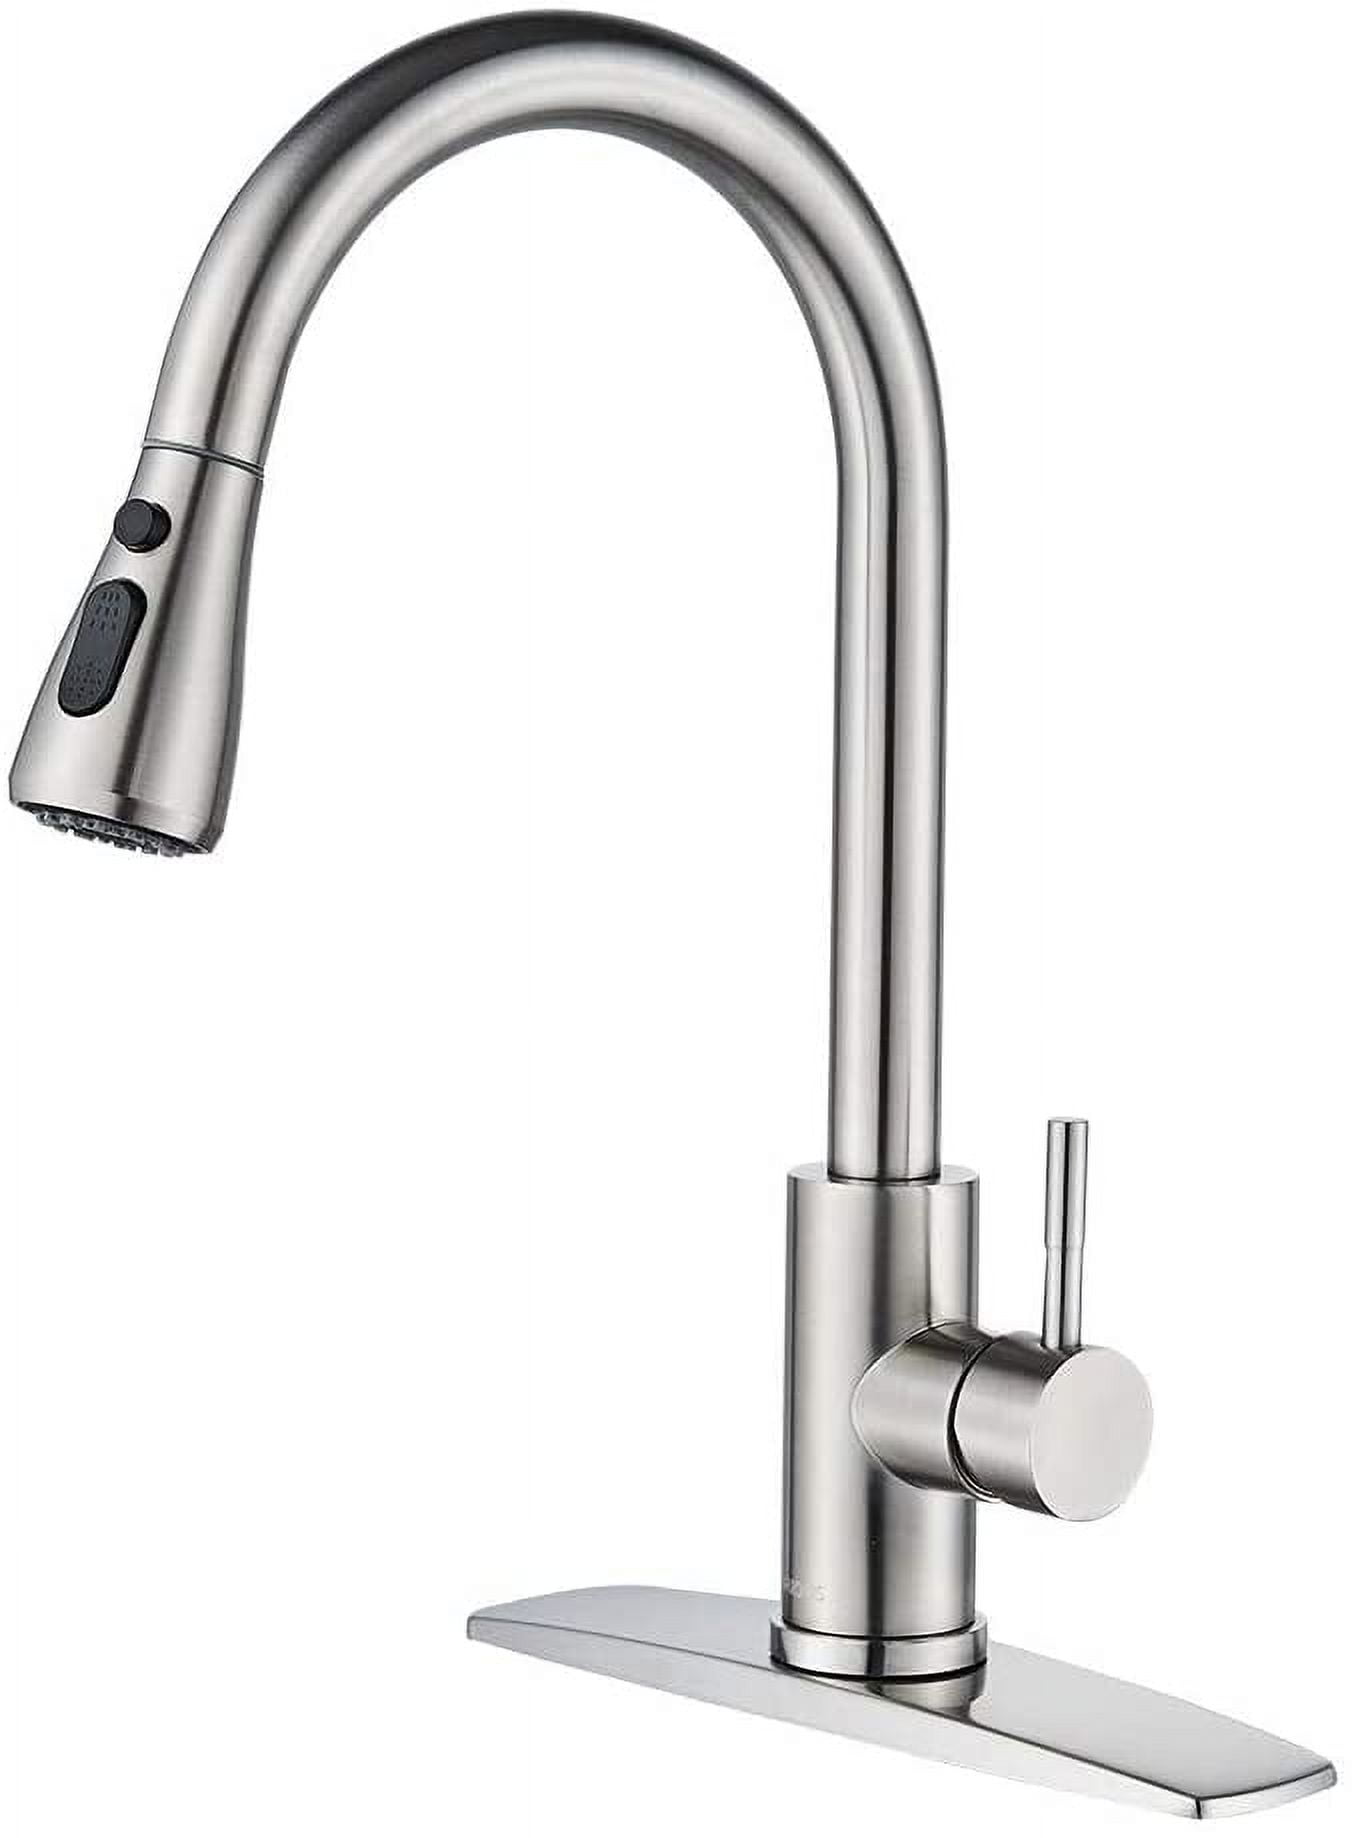 Axidou Kitchen Faucet With Pull Down